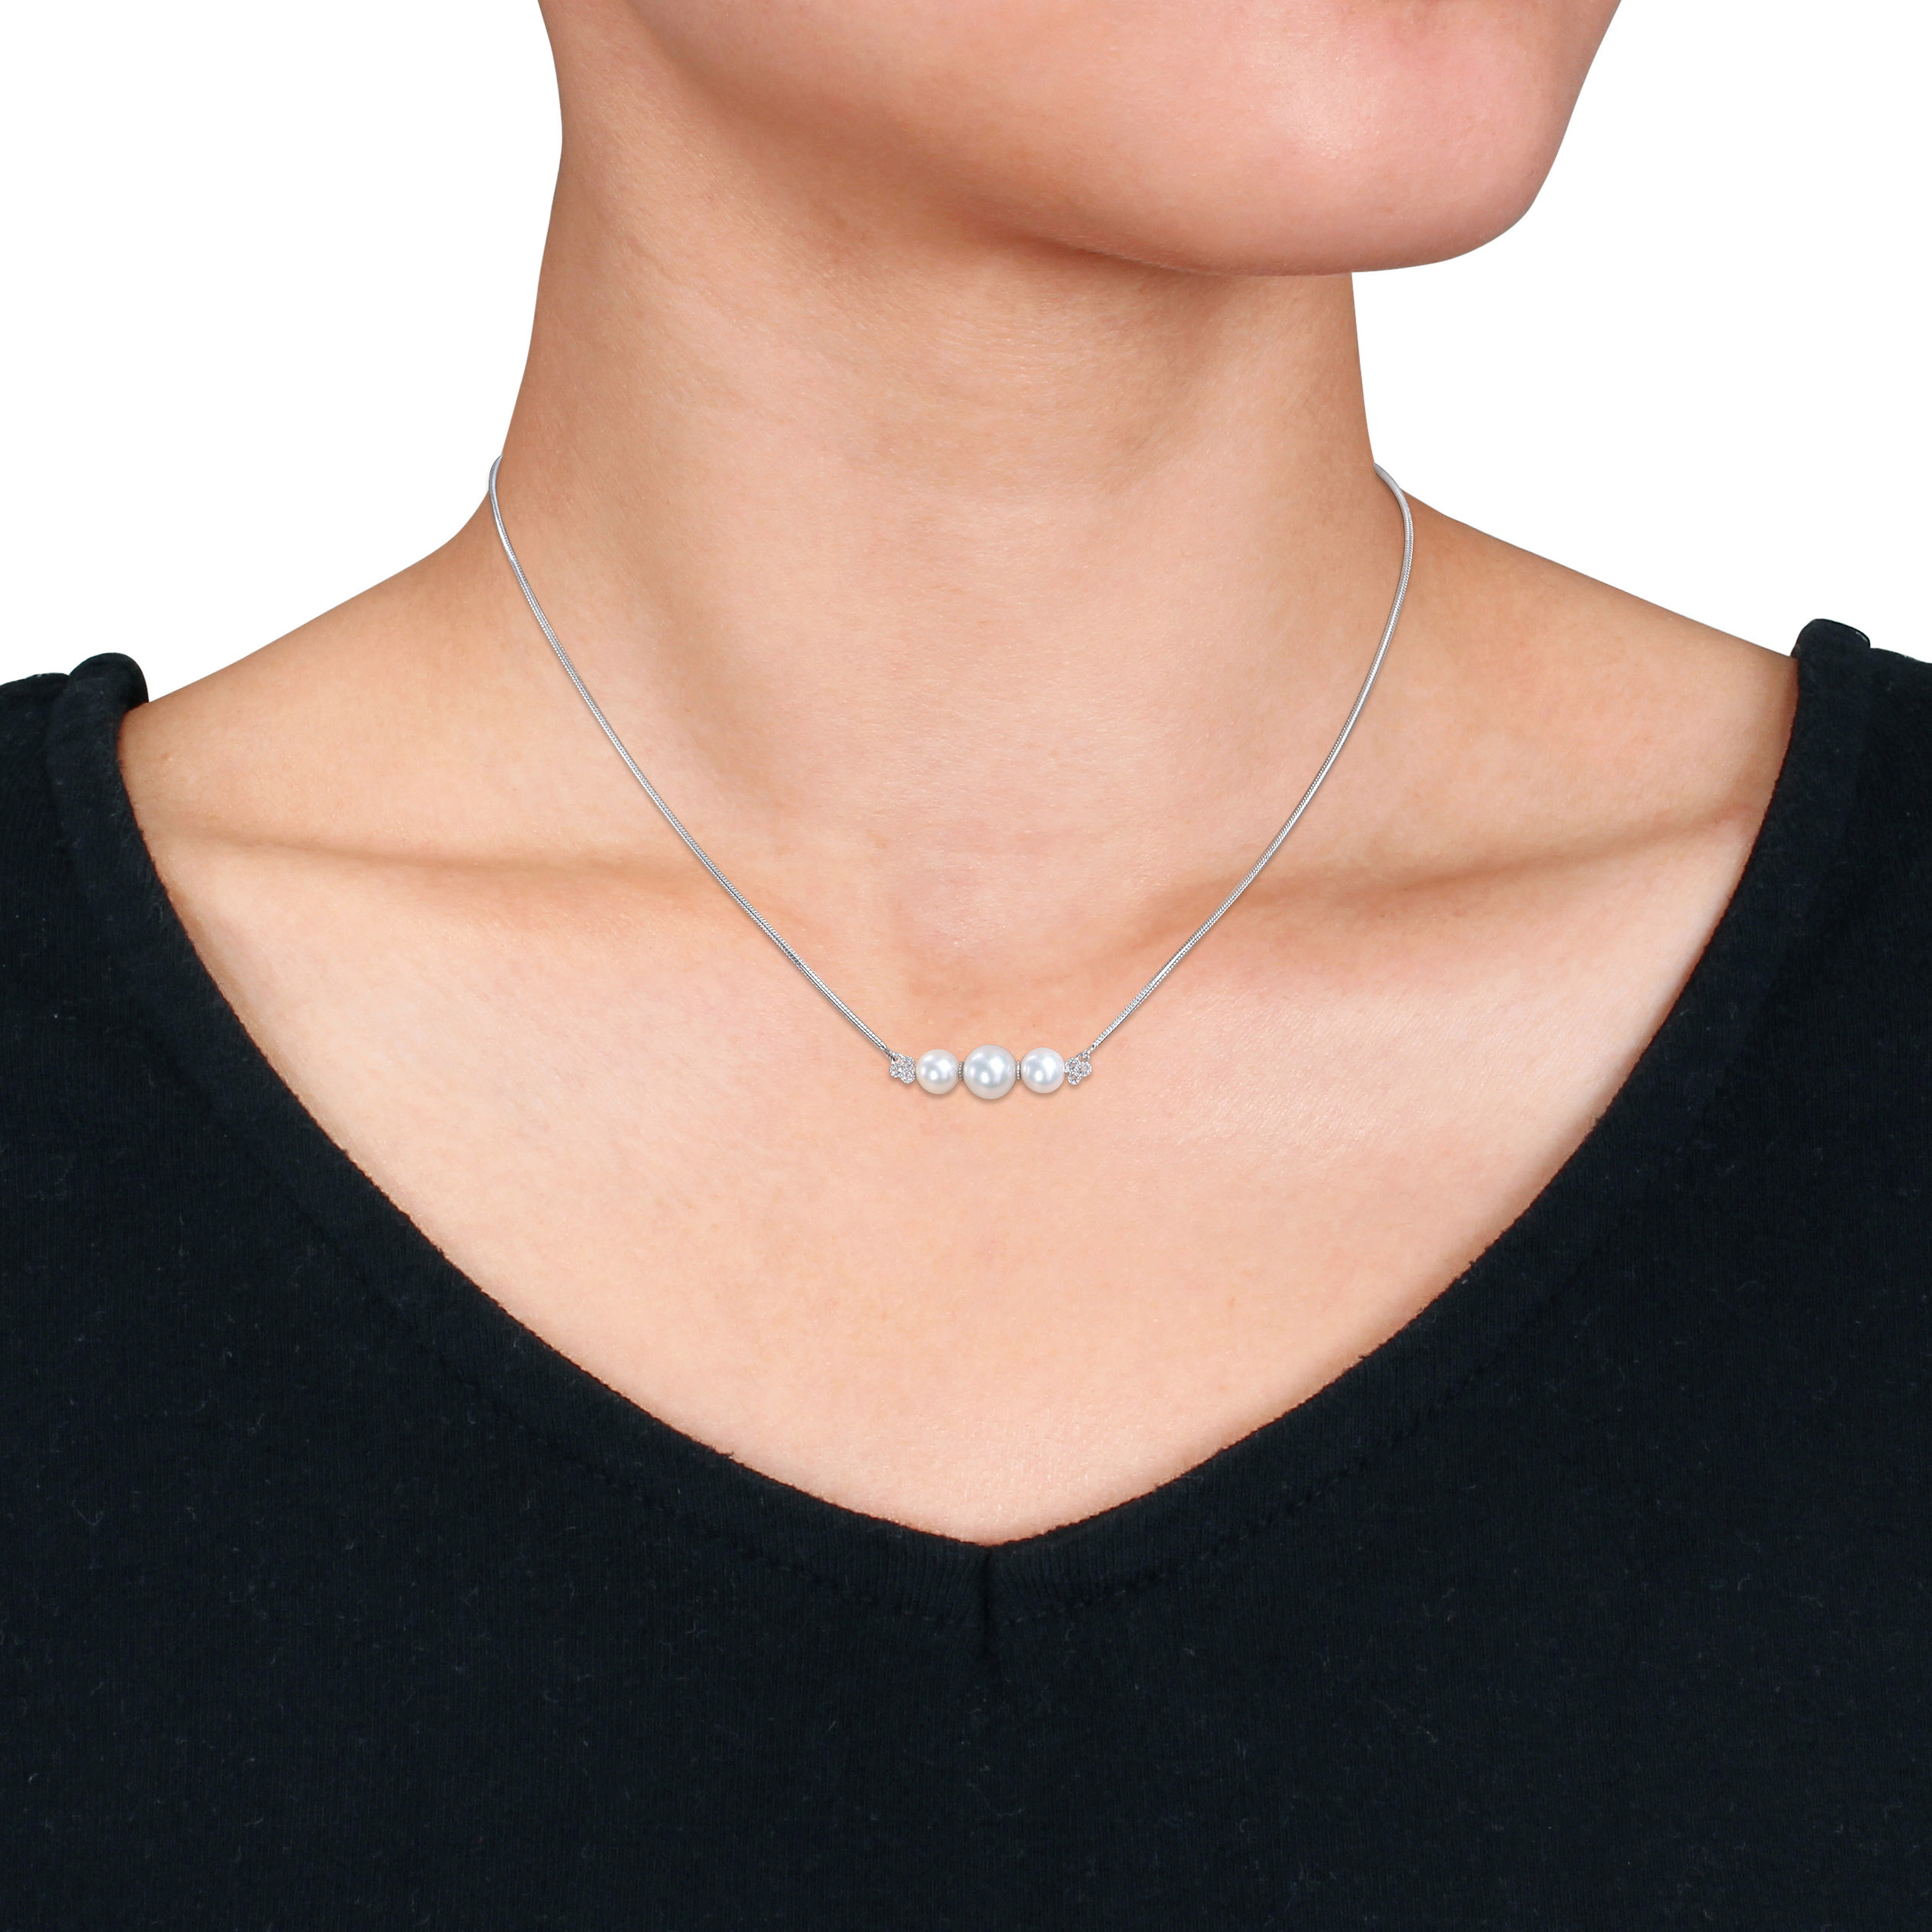 Freshwater Cultured Pearl and 1/5 CT TGW White Topaz Bar Necklace in Sterling Silver